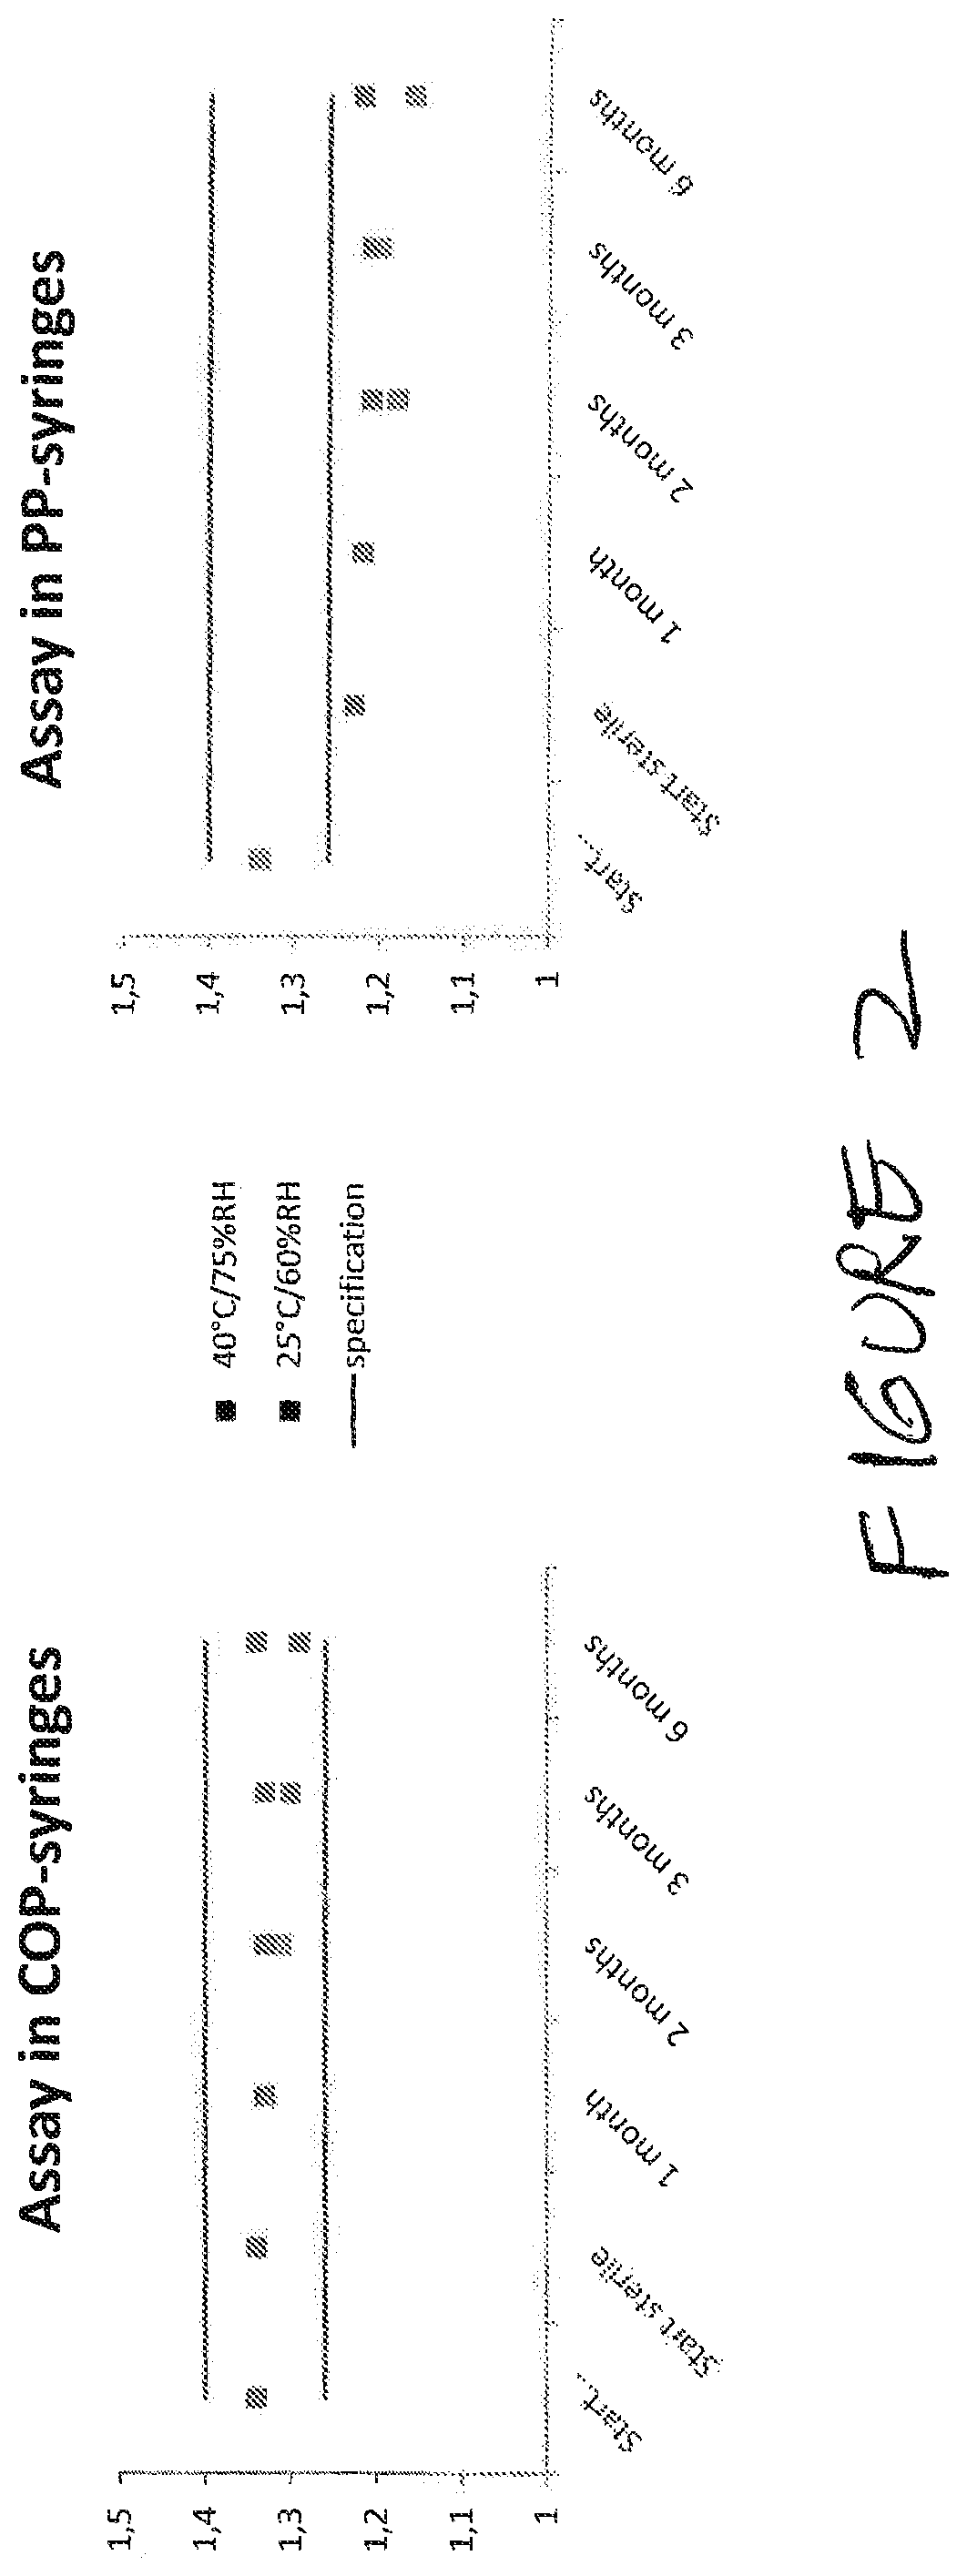 Article of manufacture comprising local anesthetic, buffer, and glycosaminoglycan in syringe with improved stability